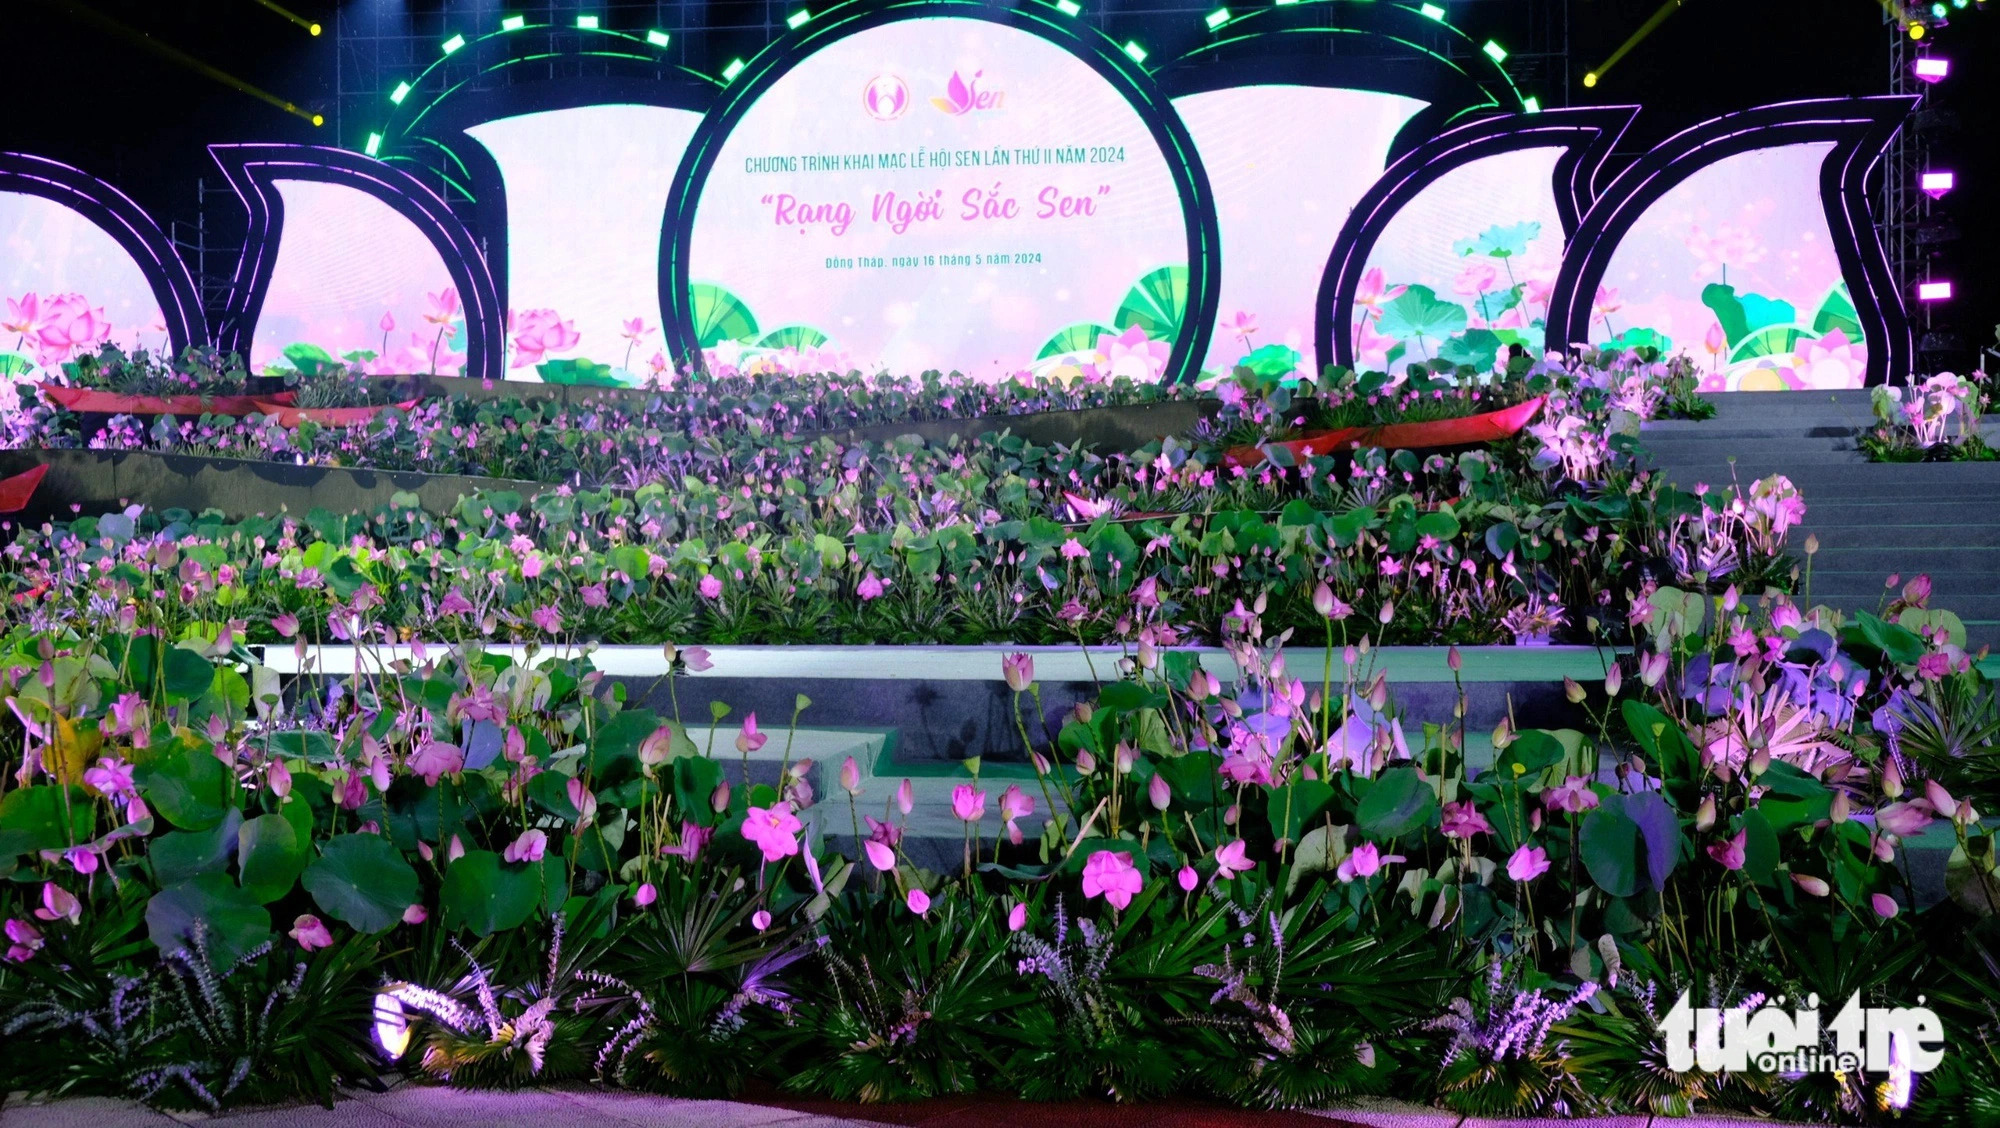 A stage decorated with thousands of lotus pots at the opening ceremony of the second Lotus Festival in Dong Thap Province, southern Vietnam on May 16, 2024. Photo: Dang Tuyet / Tuoi Tre